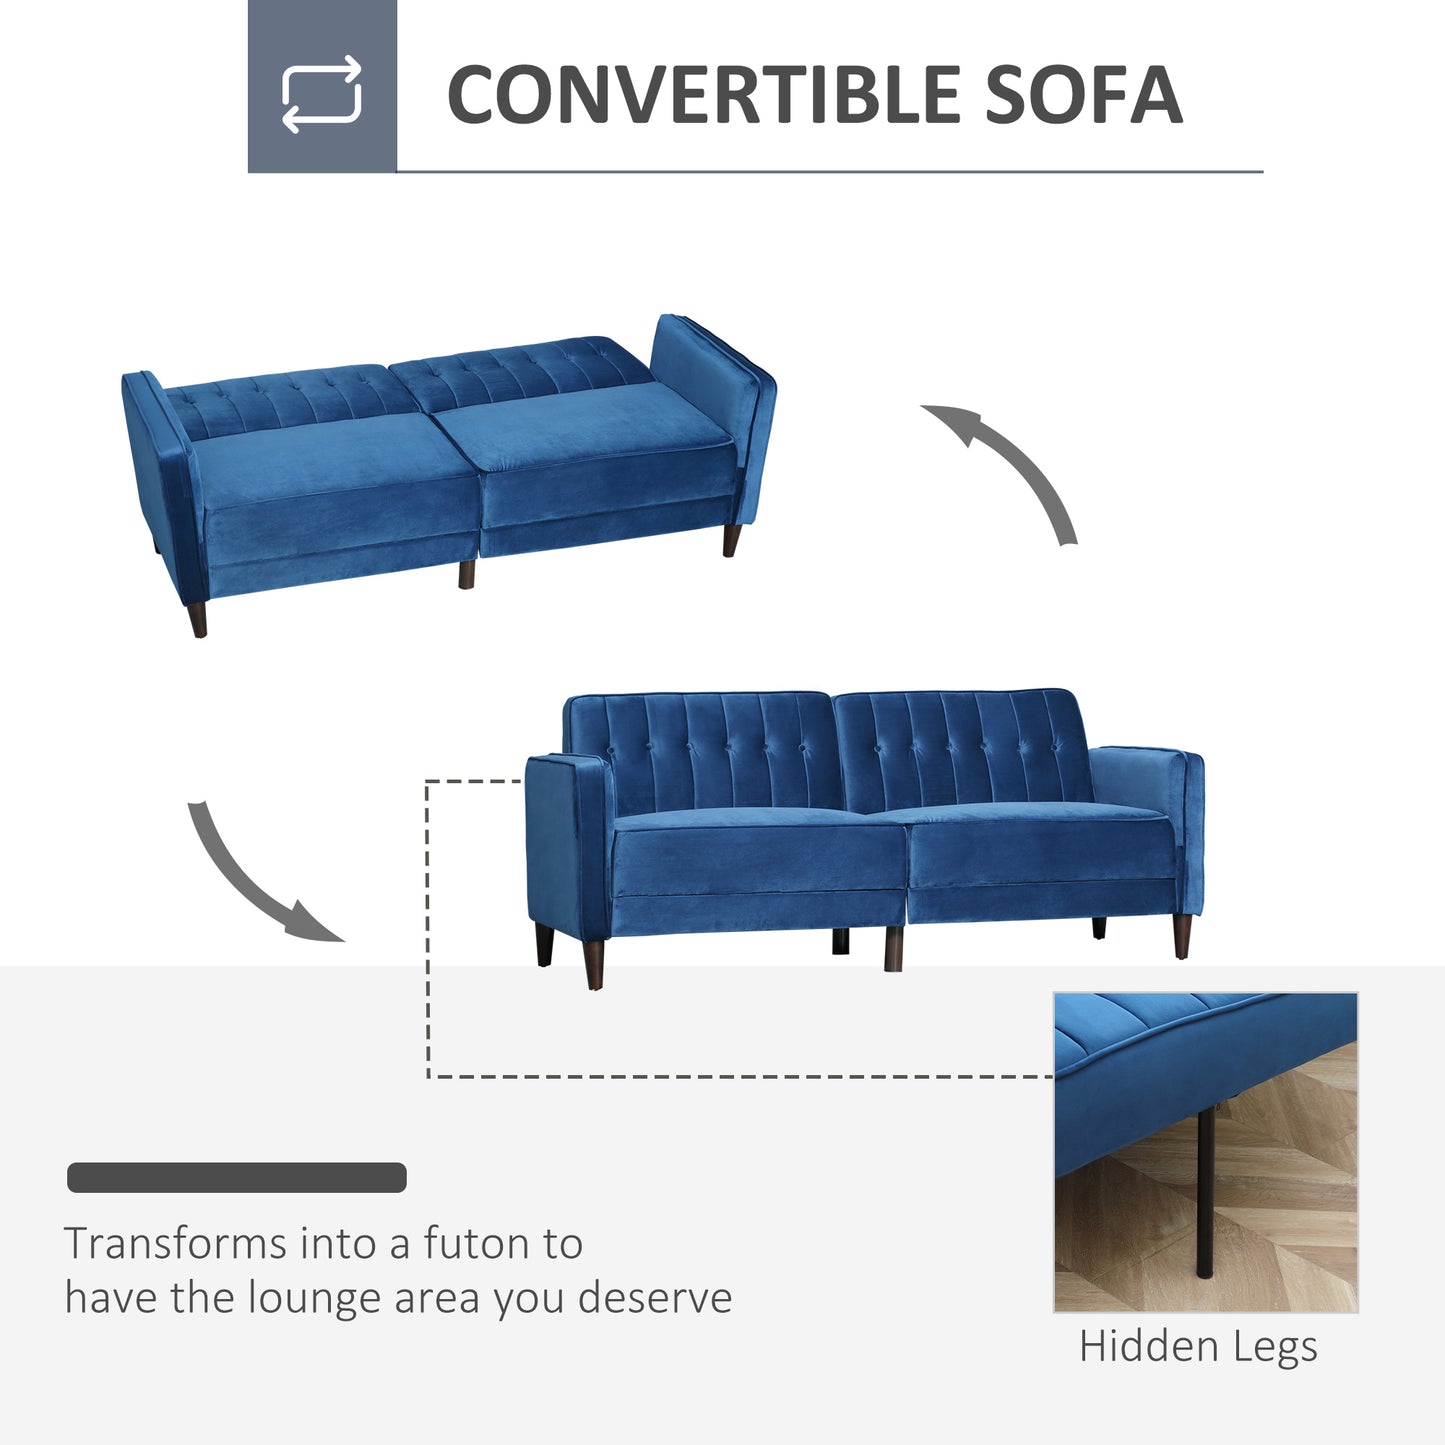 HOMCOM Modern Convertible Sofa Futon Velvet-Touch Tufted Couch Compact Loveseat Sleeper Sofa Bed, Blue